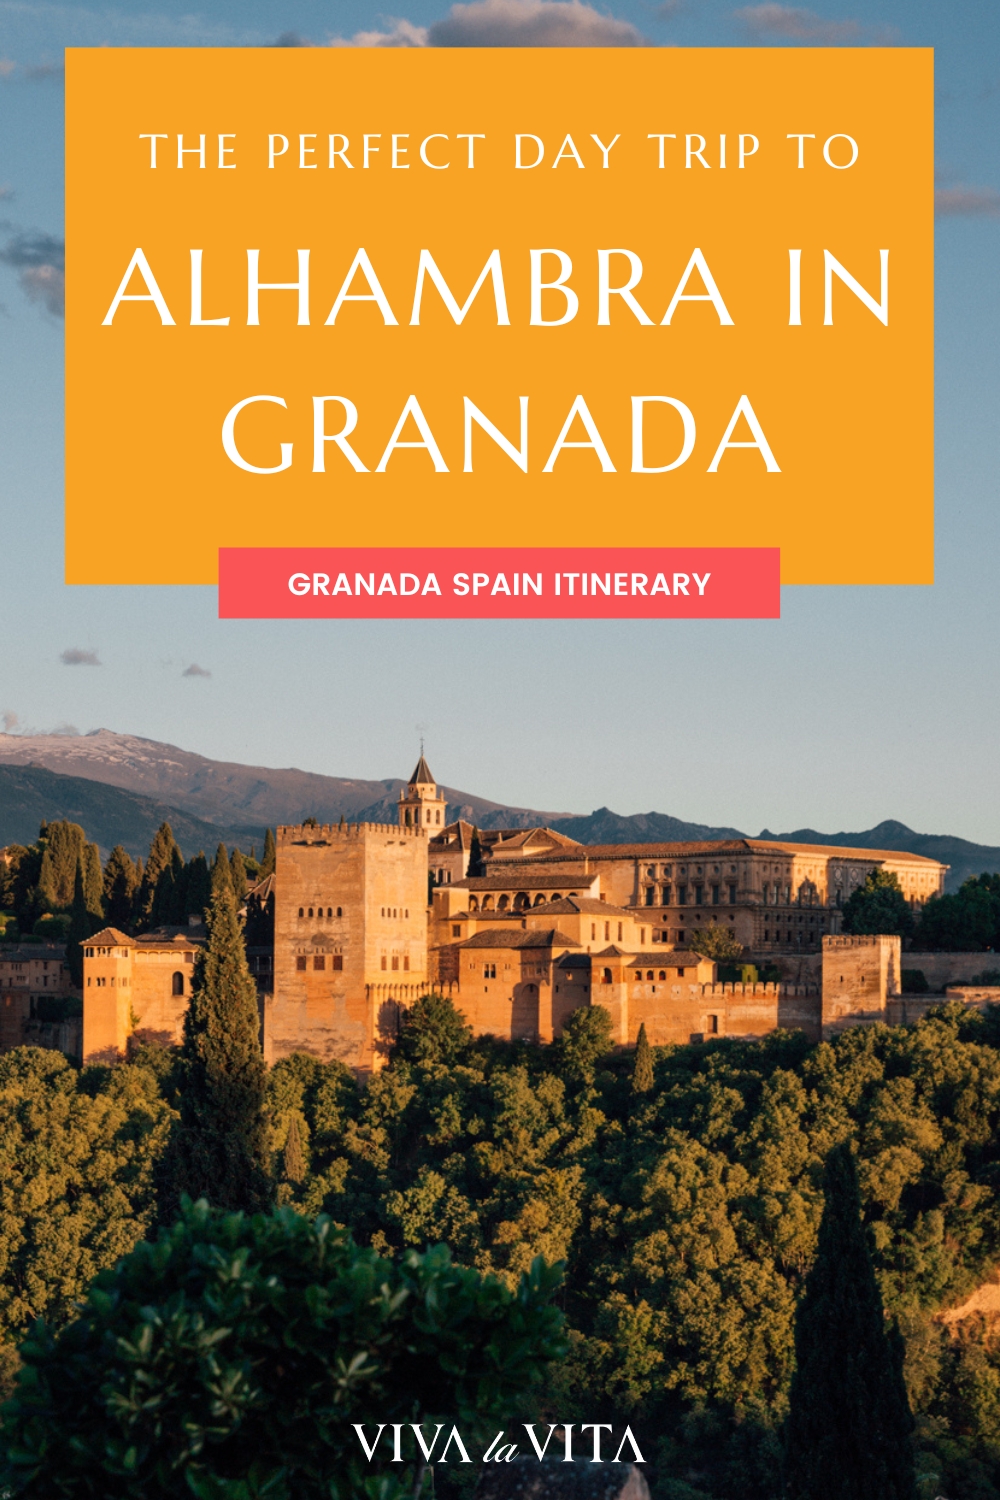 Pinterest image showing the view of Alhambra in Granada, with a headline that reads: The perfect day trip to Alhambra in Granada, Granada Spain Itinerary.